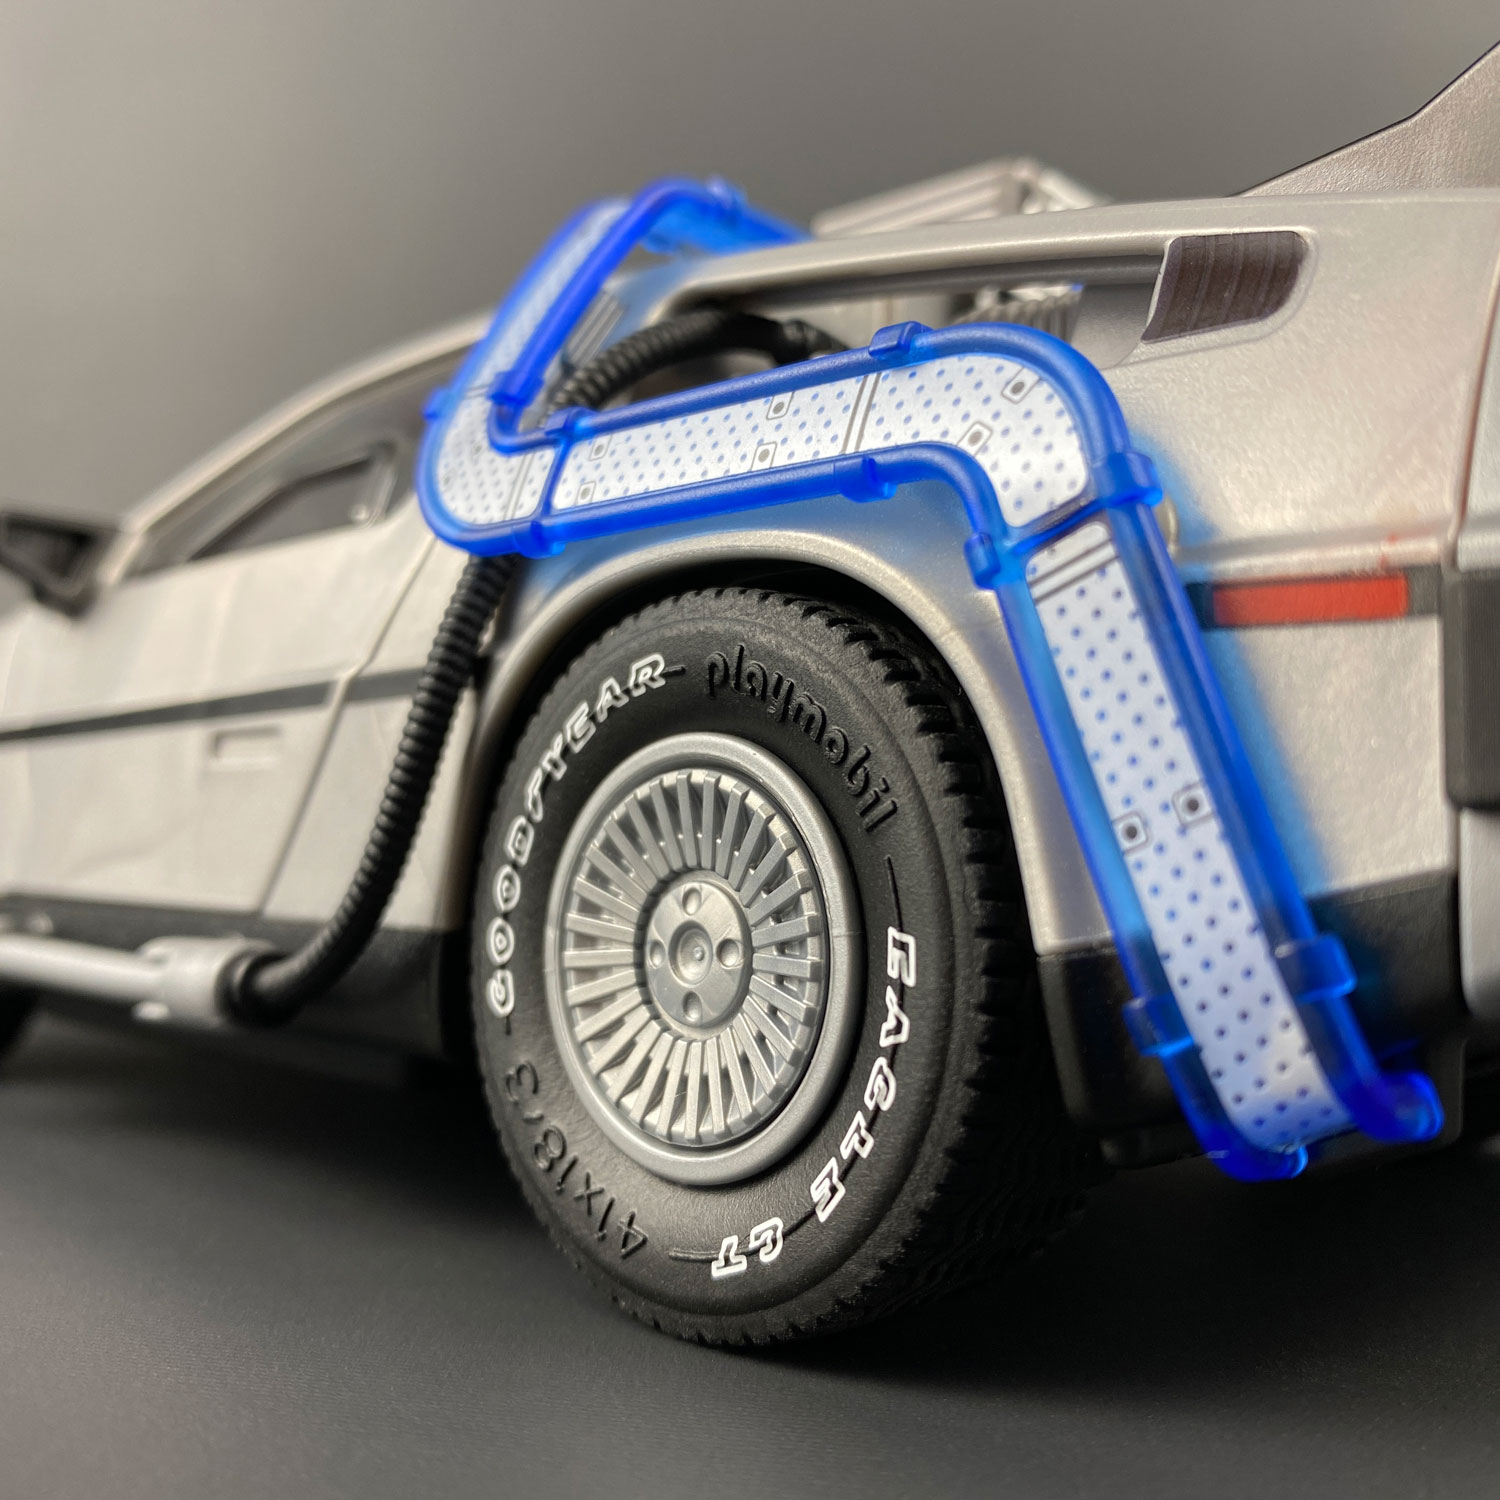 Playmobil DeLorean wheel with Tyre Transfer added